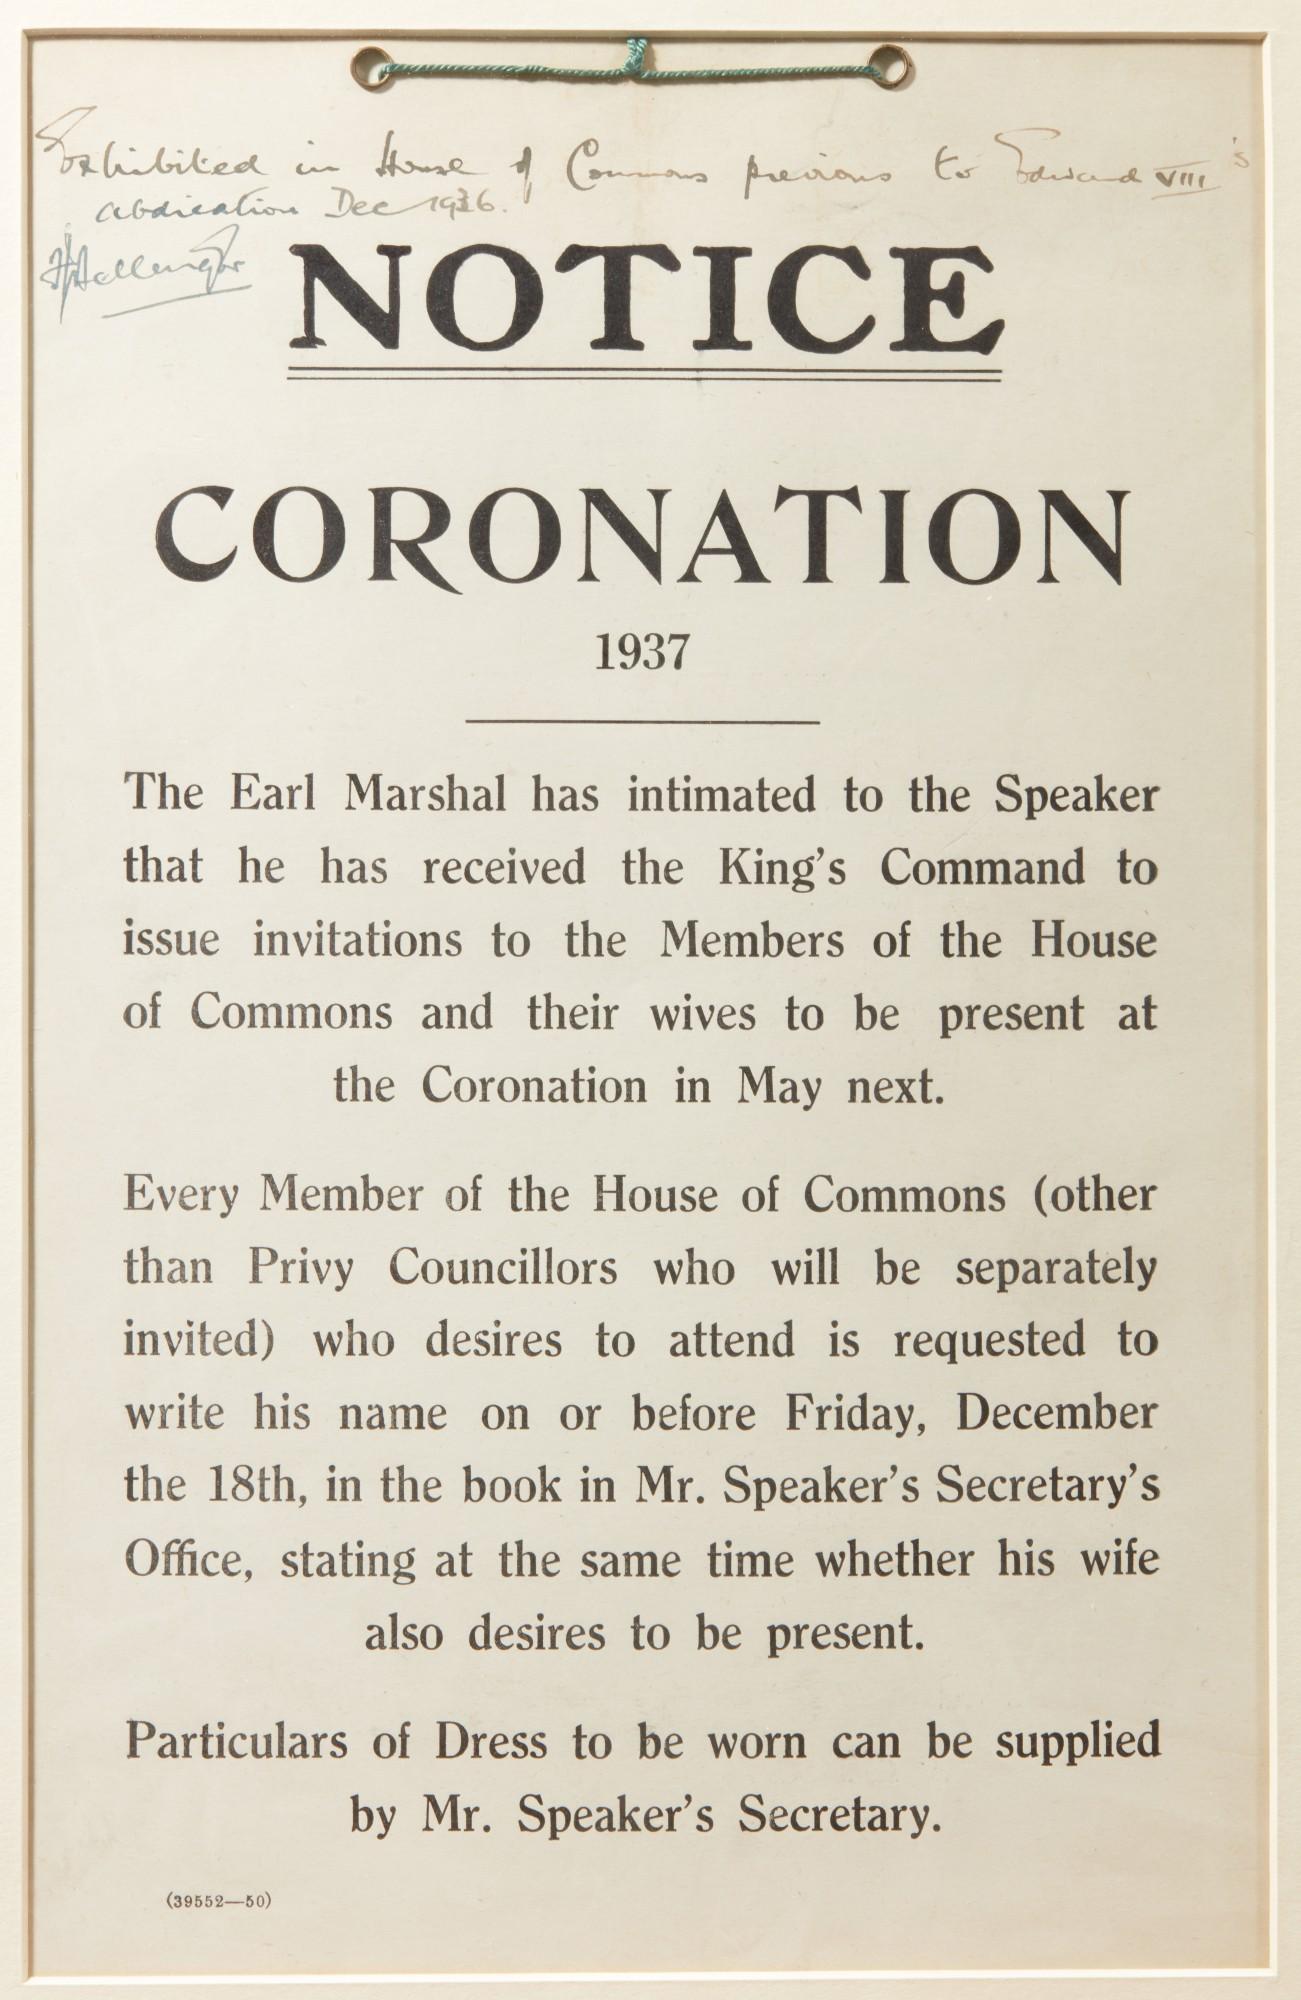 Official House of Commons printed notice of the coronation of Edward VIII, the Duke of Windsor
In 1934, Prince Edward was next in line to the throne. He had no patience for the arcane rules of court life and embarked on a romantic relationship with